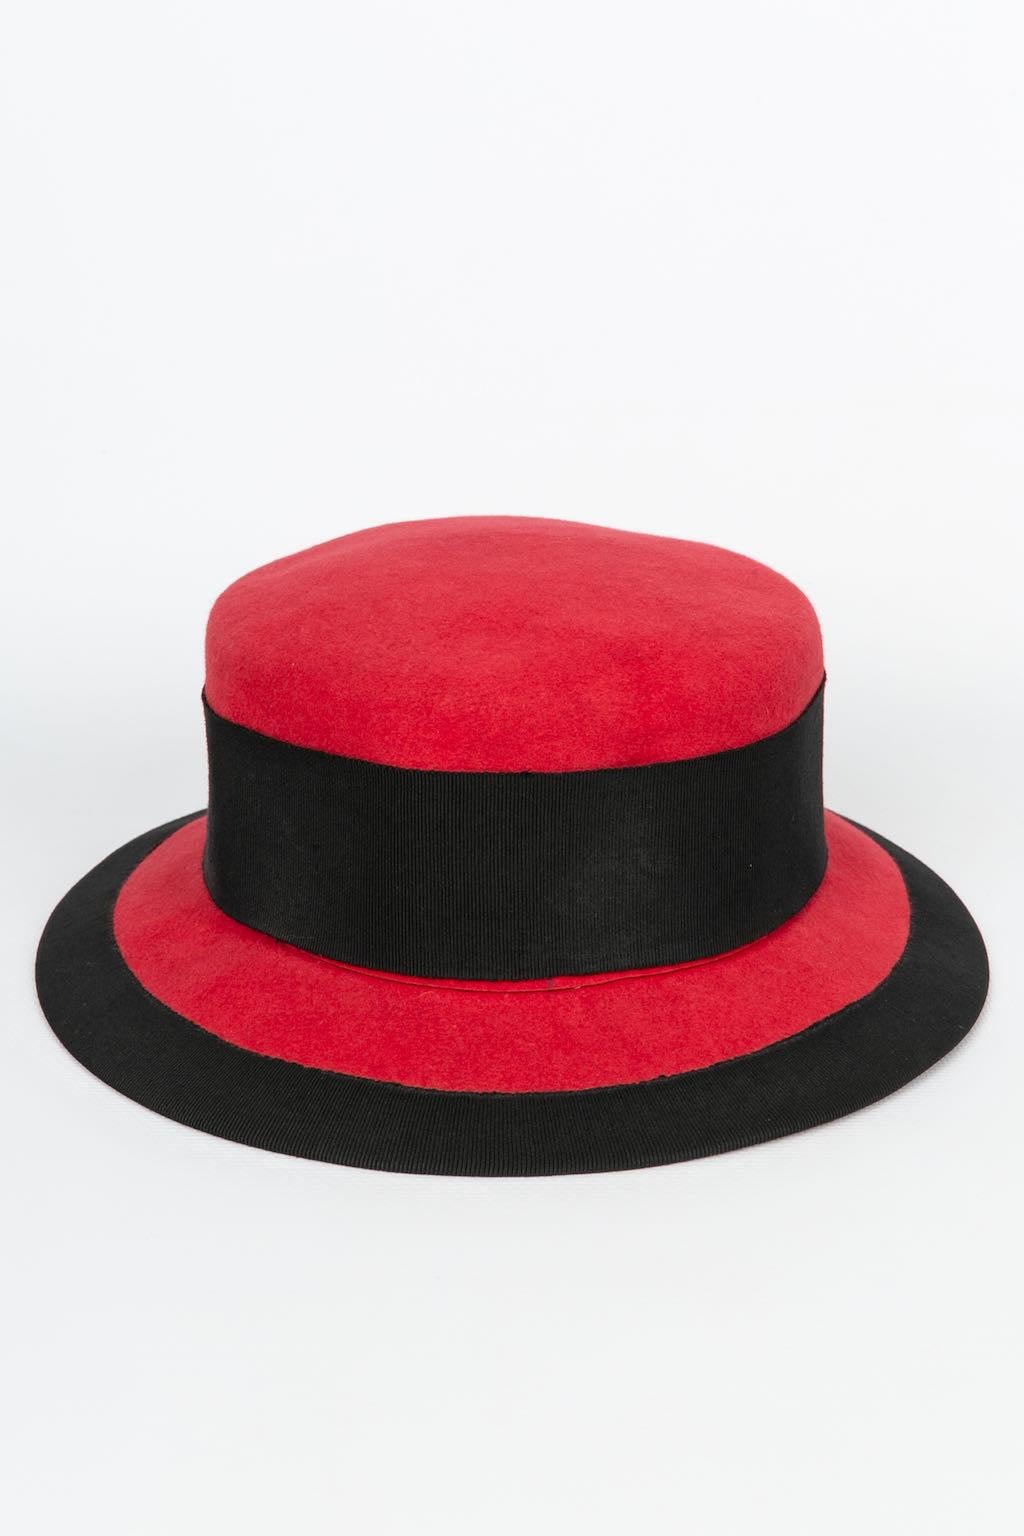 Yves Saint Laurent -(Made in France) Red and black catwalk hat. Size 57.

Additional information: 
Dimensions: Head circumference: 57 cm, Height: 7 cm, Brim width: 5 cm
Condition: Very good condition
Seller Ref number: CHP25